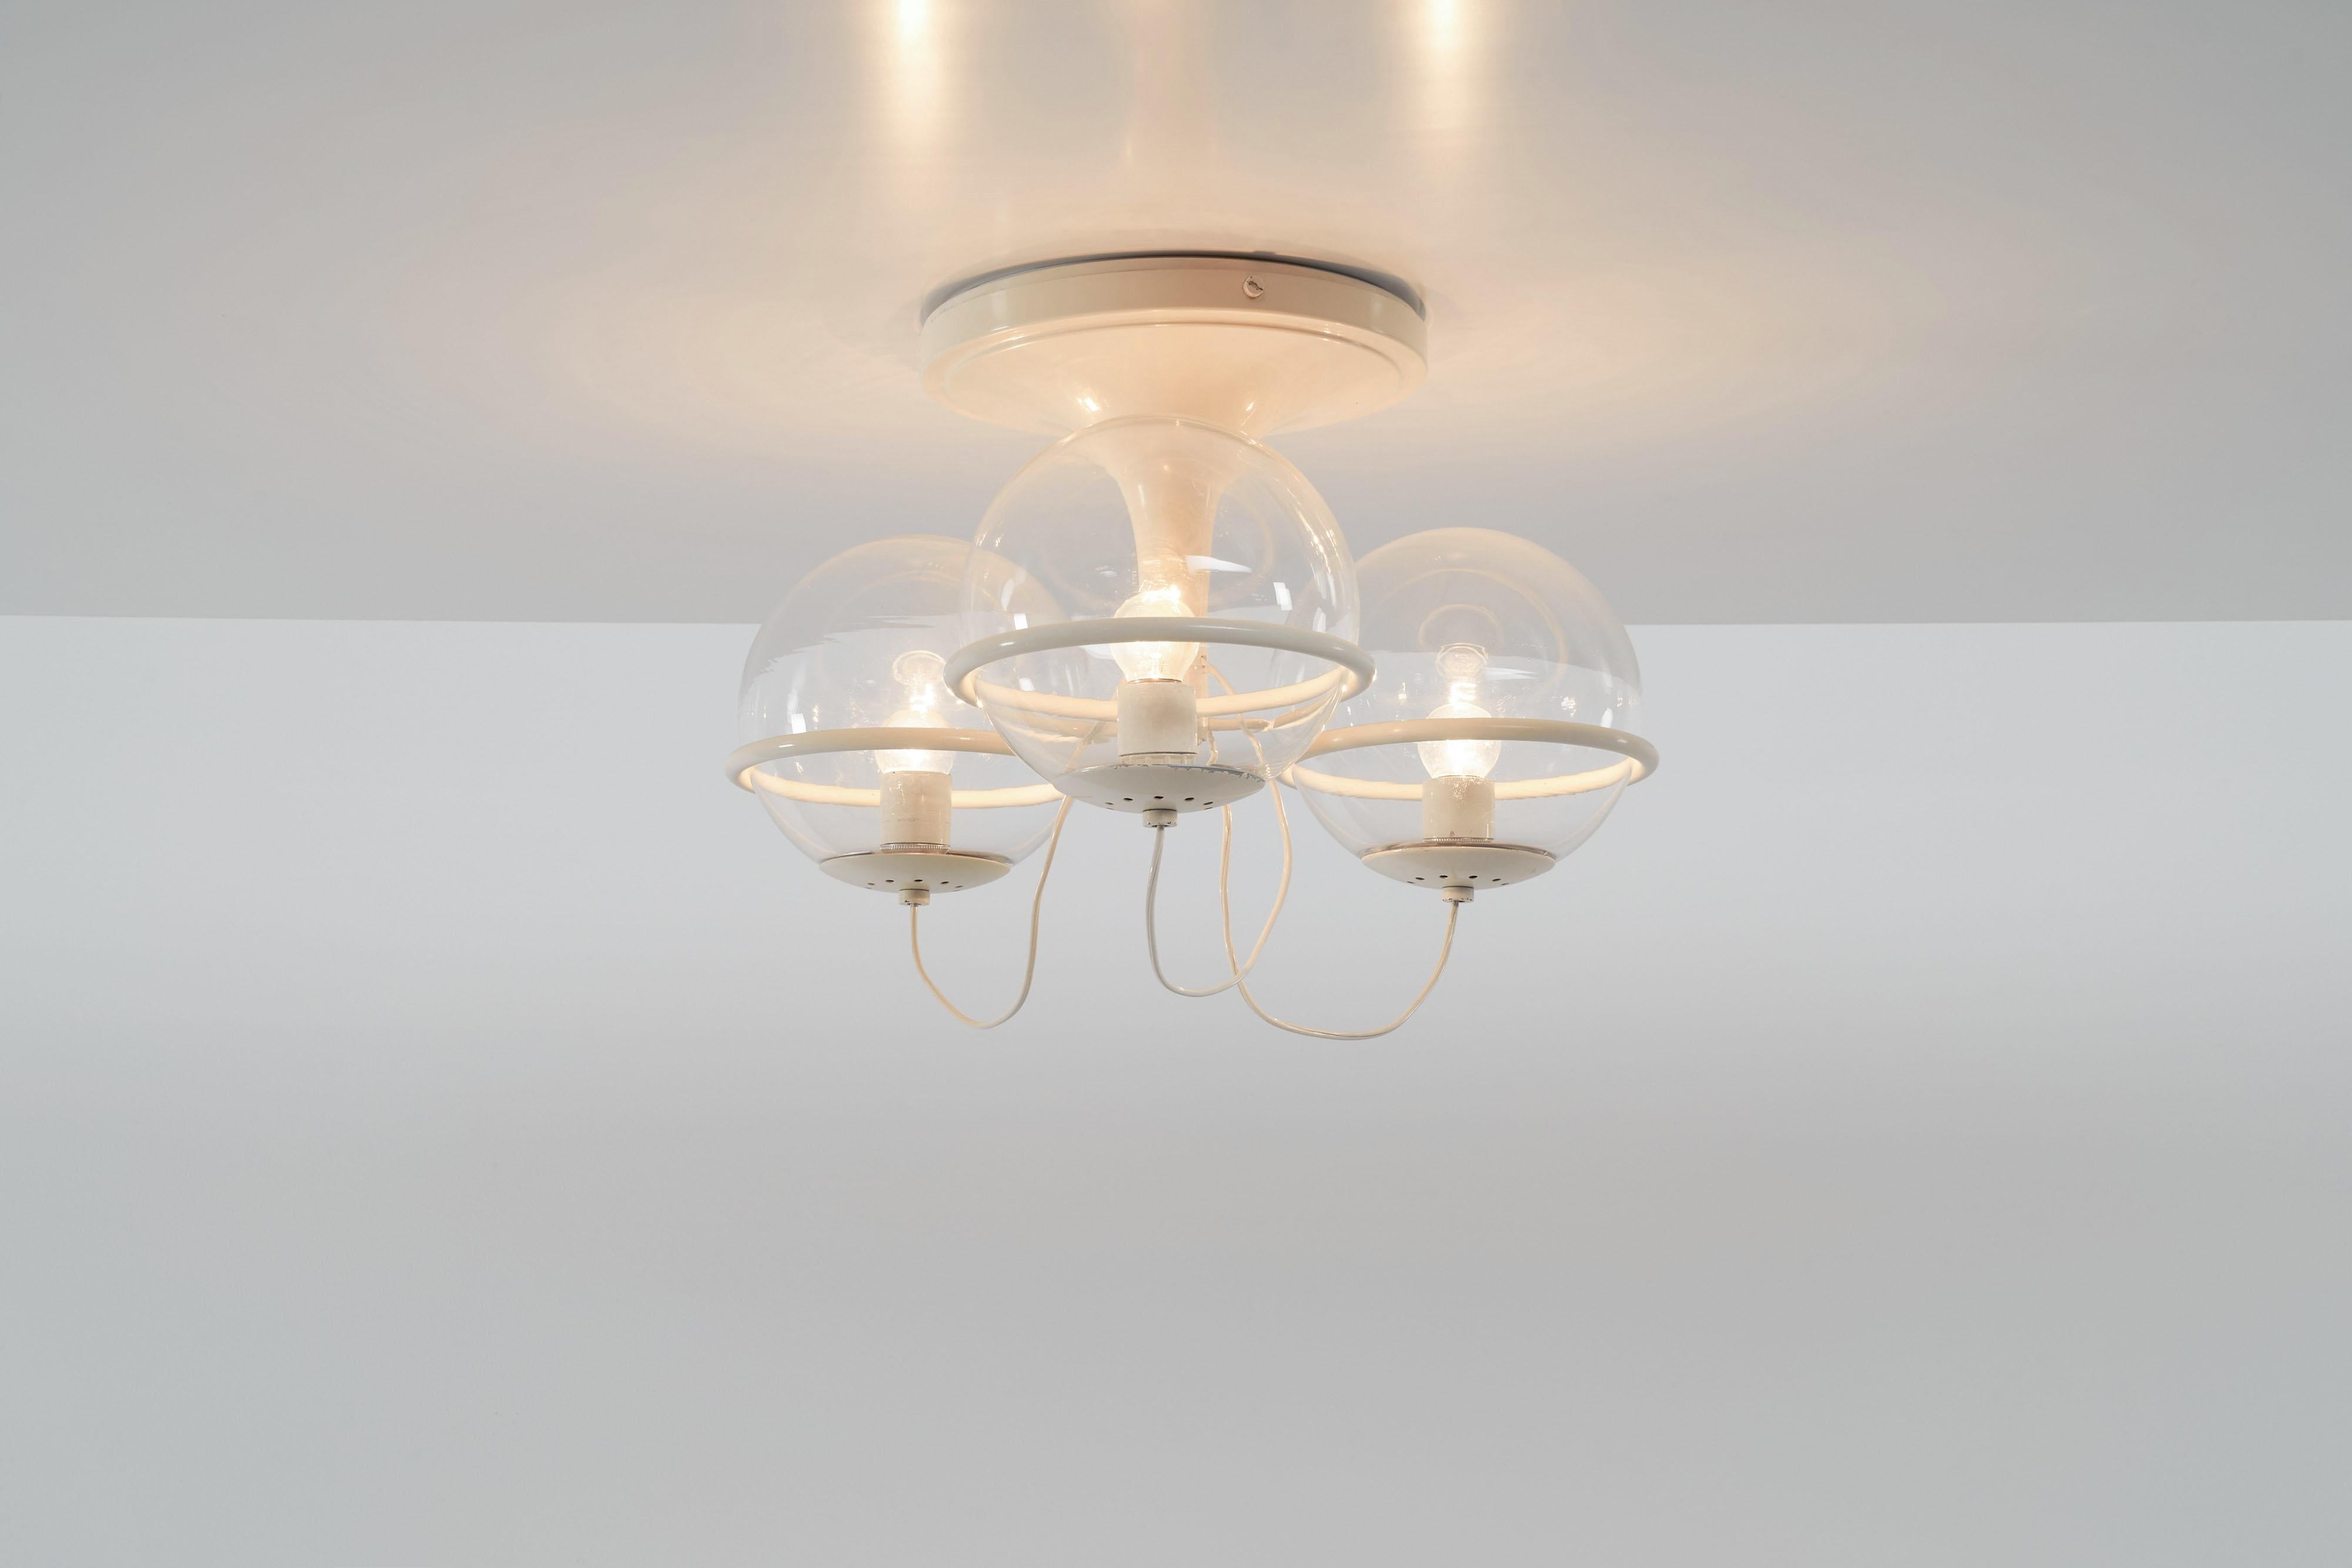 A rare early model 2042/3 ceiling lamp designed by Gino Sarfatti and manufactured by Arteluce, Italy 1960. This version of the 2042 lamp has 3 clear glass globes, the /3 in the model number stands for the number of globes as this lamp exists in